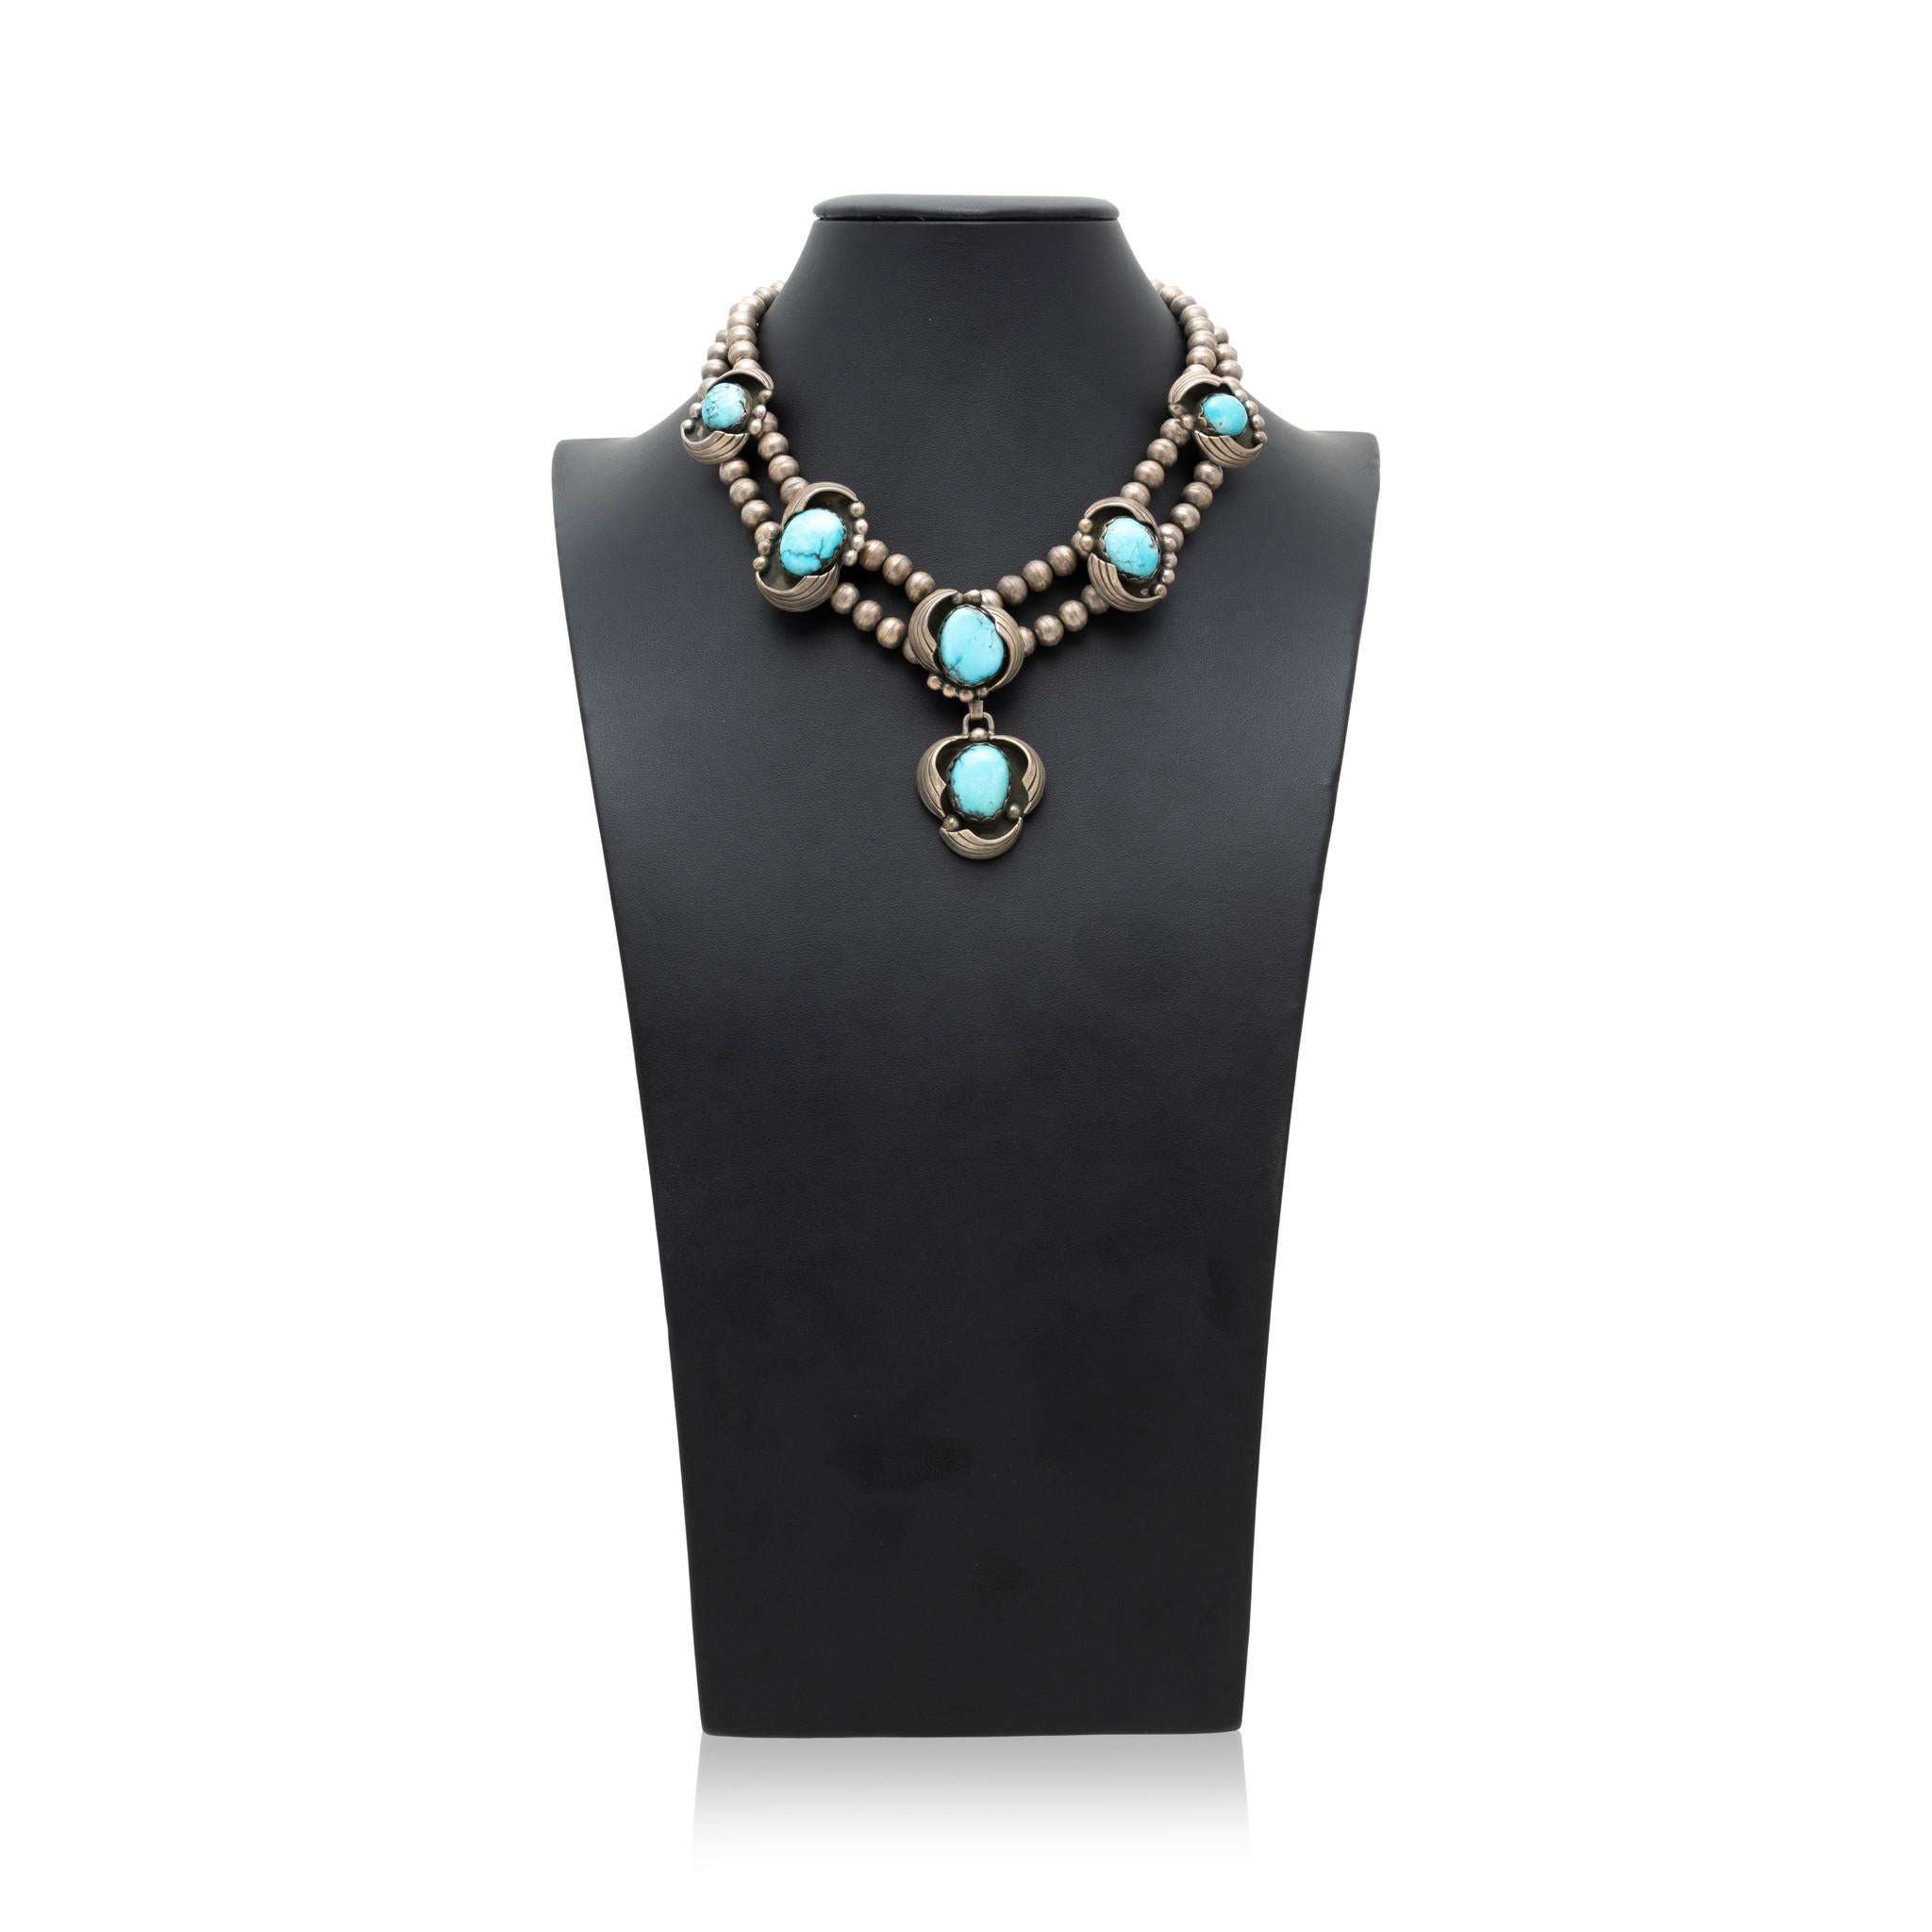 Double strand Navajo pearl sterling silver and Morenci turquoise necklace. Six high quality stones each encased in in sterling feather and bead design against shadowbox style background. Great patina. Stones are a bright sky blue, with veins of